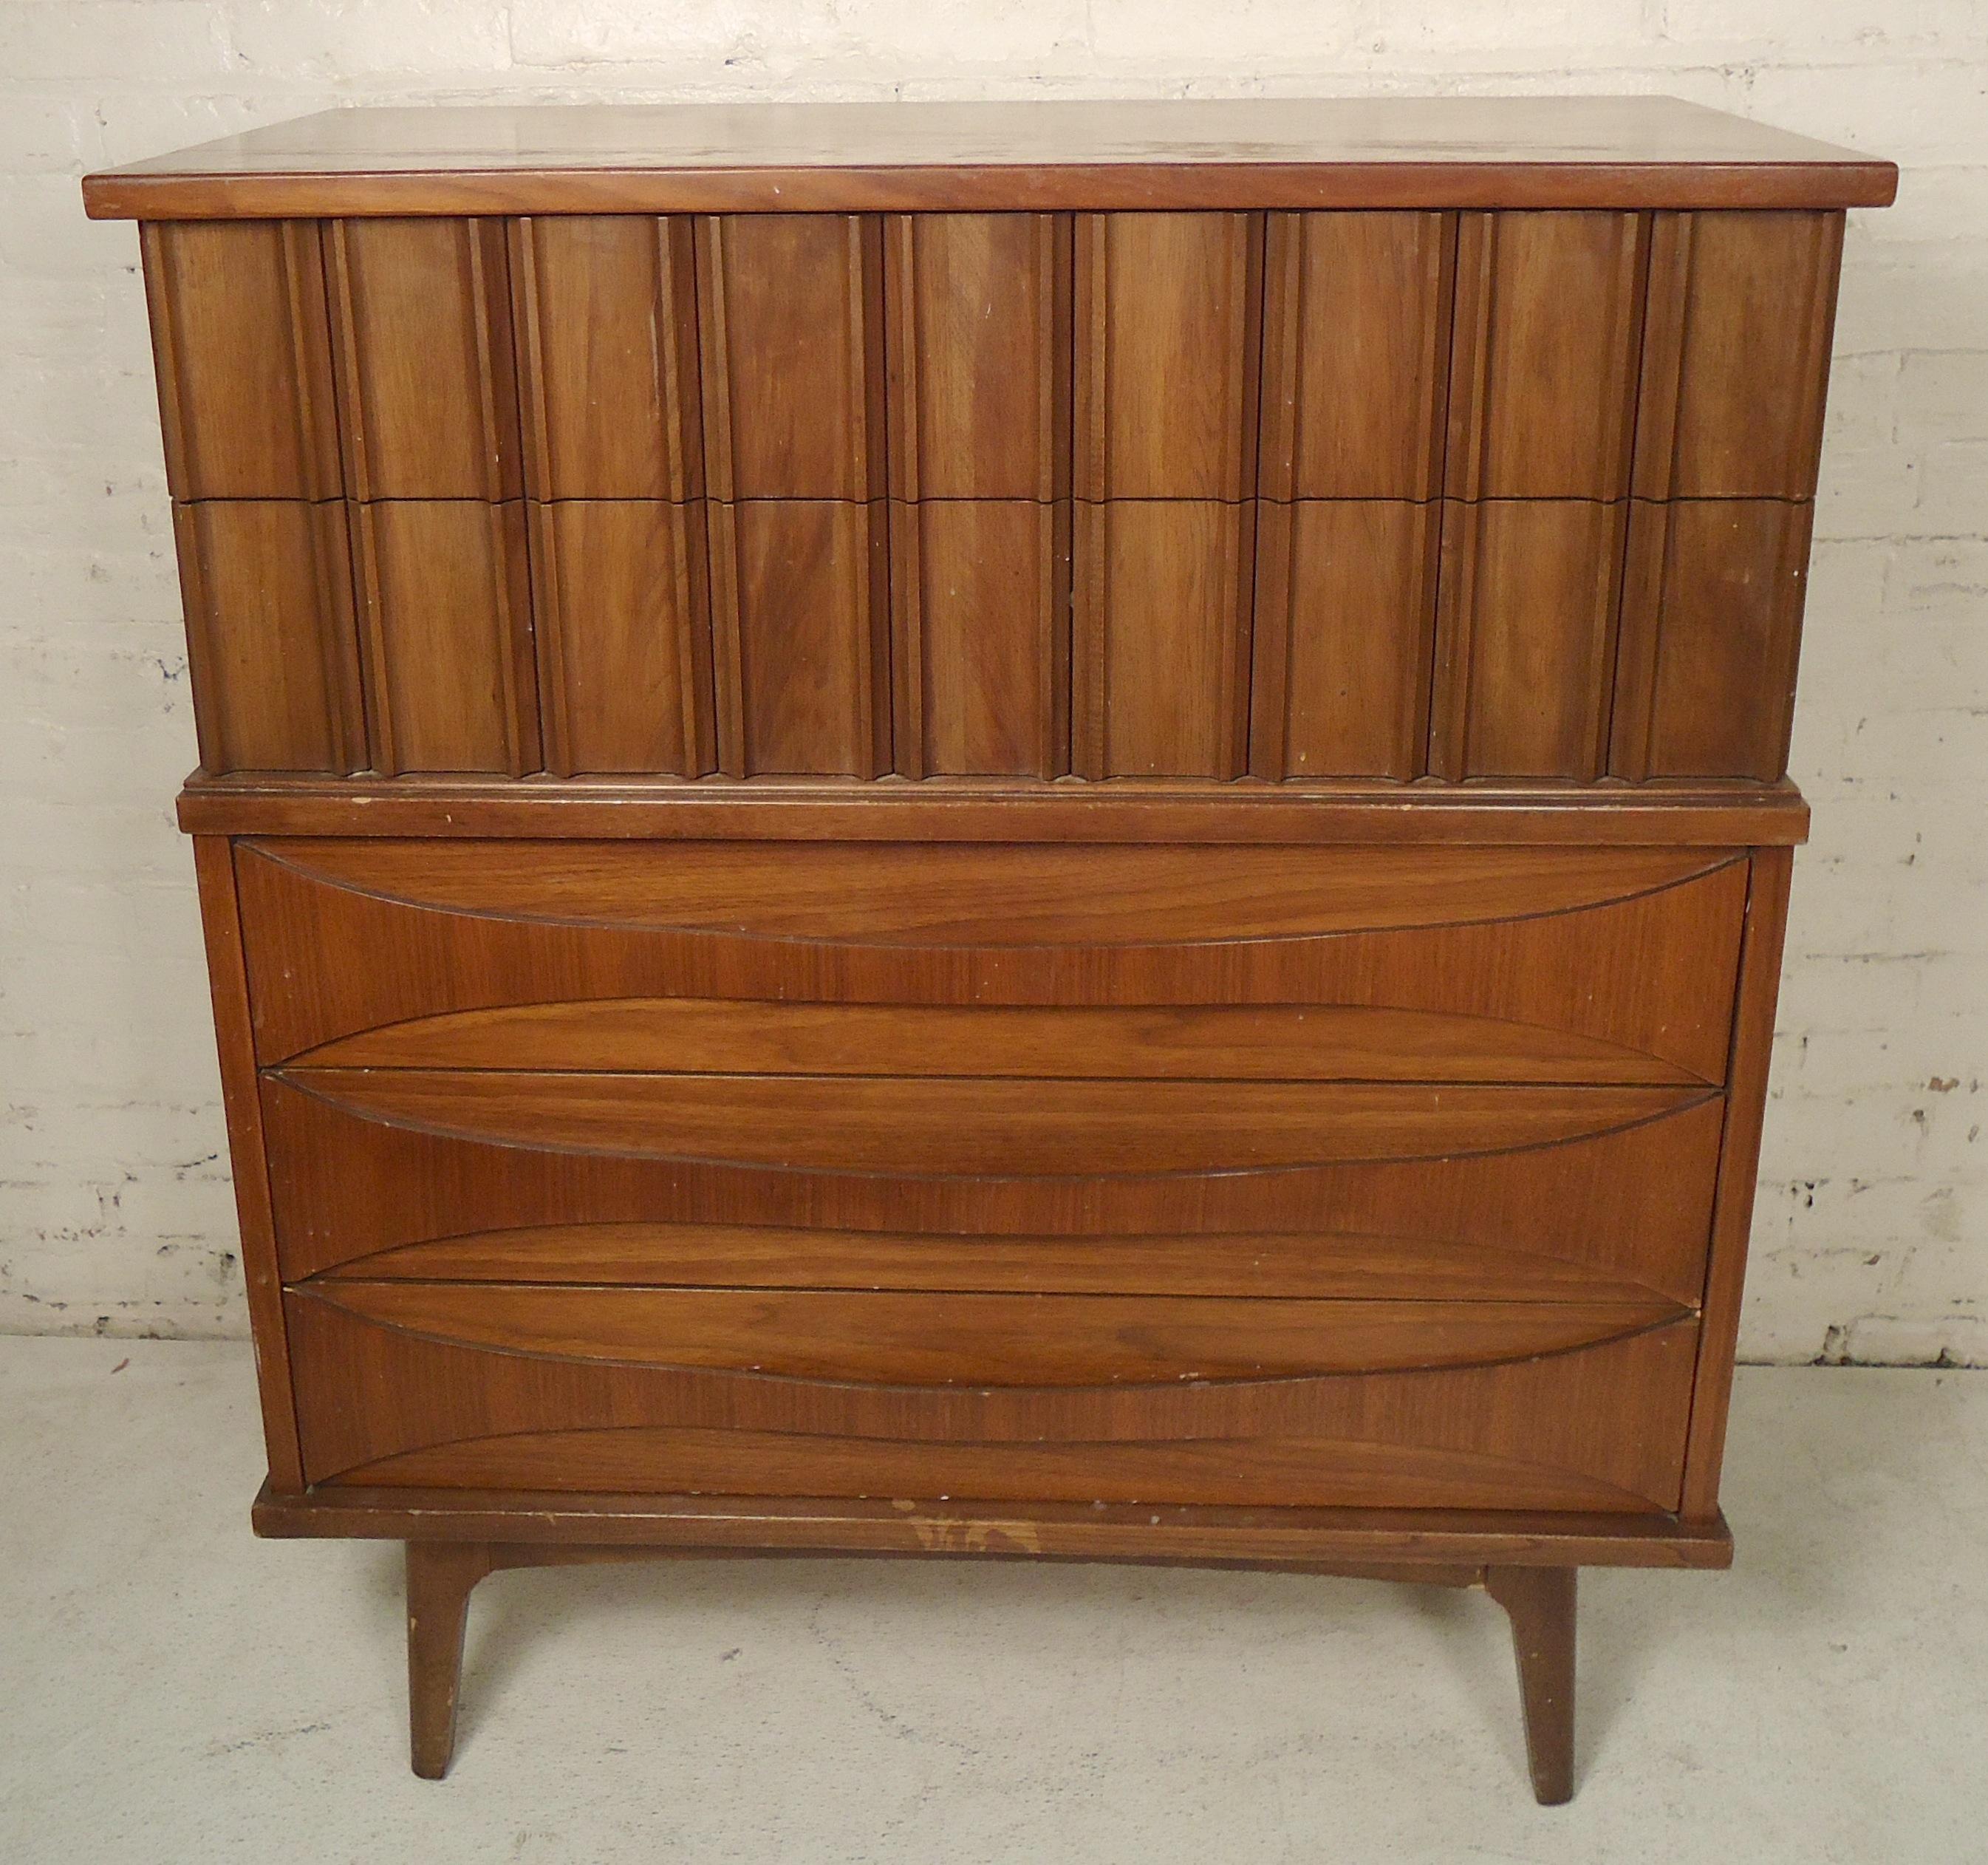 Great Mid-Century Modern designed tall dresser with sculpted handles. Five total drawers in walnut grain.

(Please confirm item location - NY or NJ - with dealer).
    